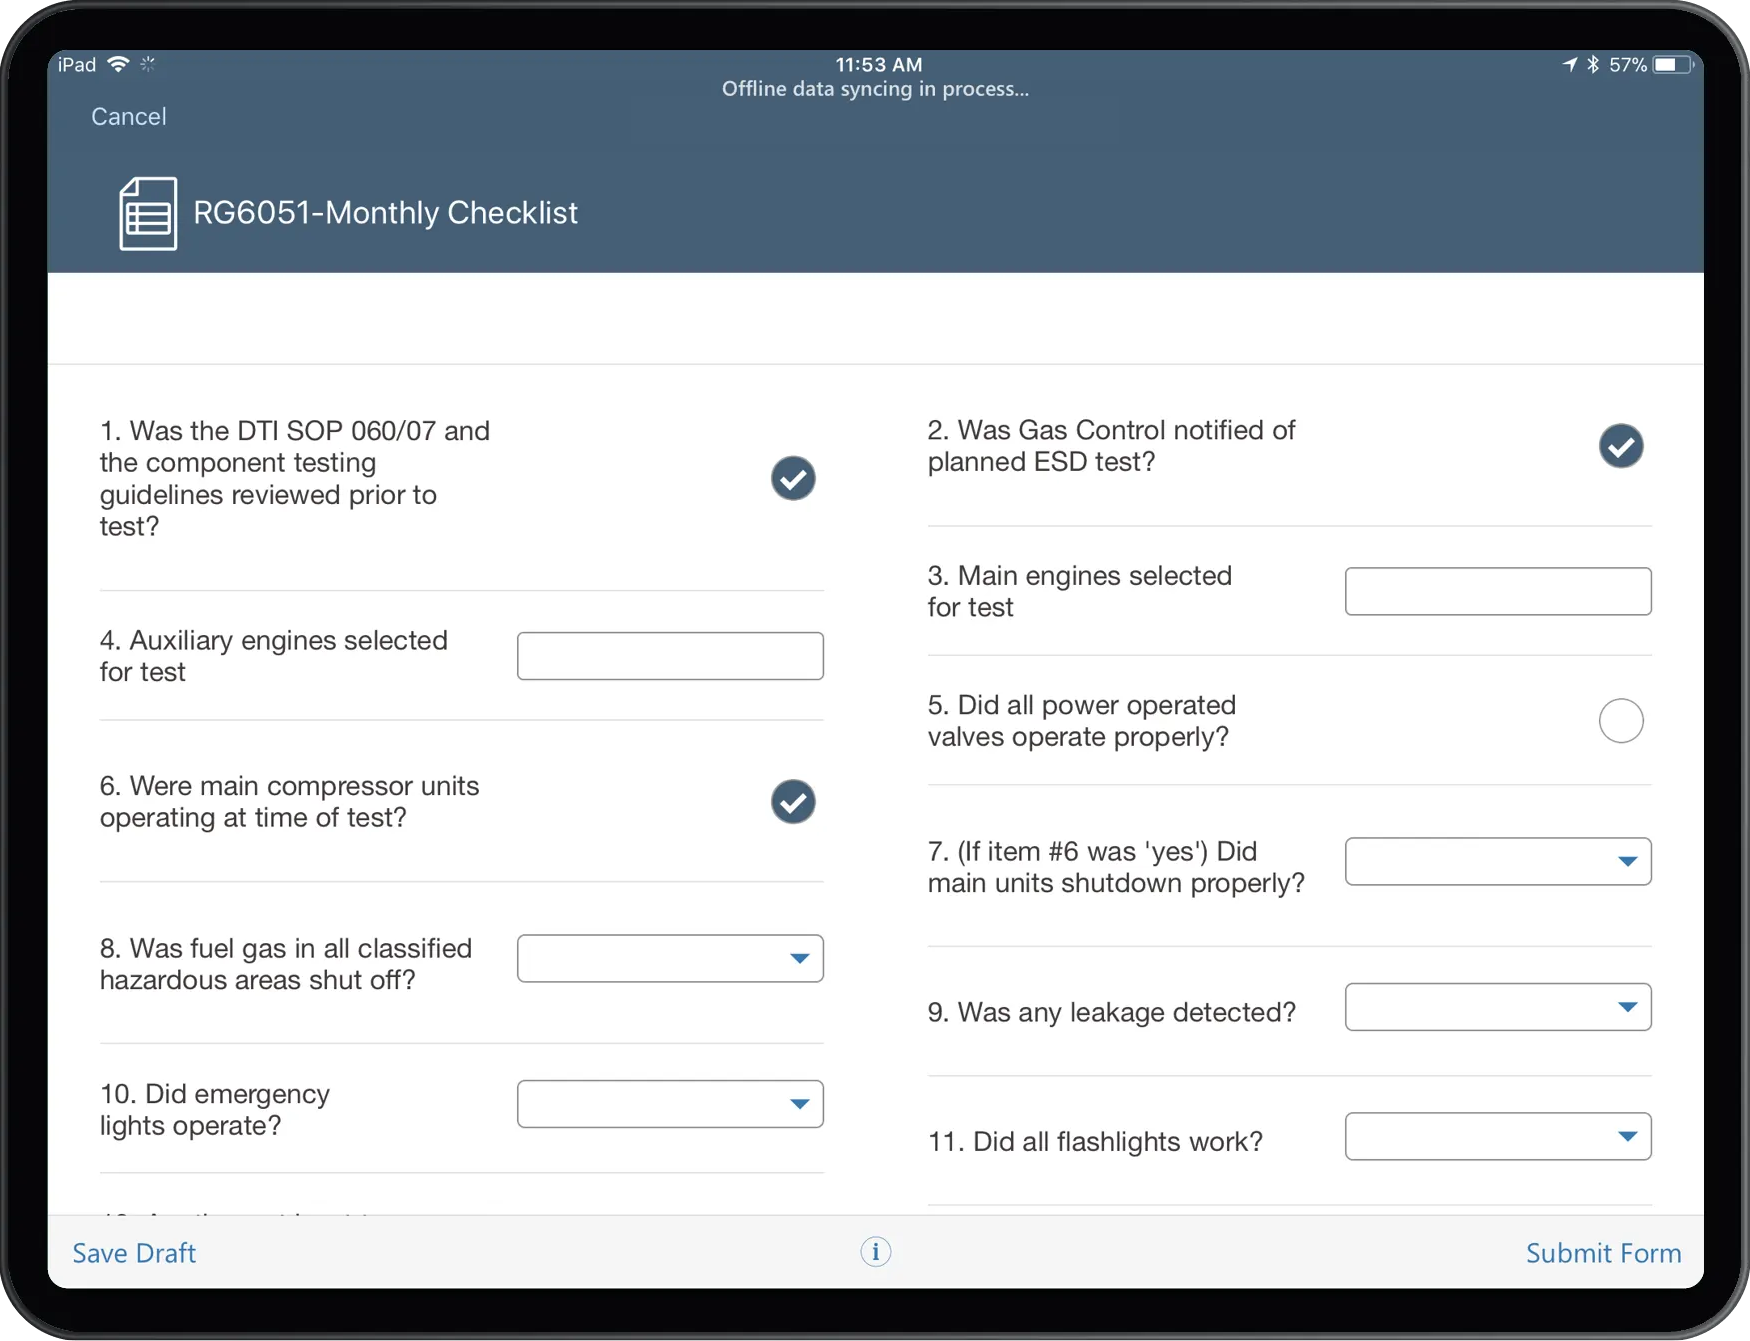 Mobile Inspections and Checklists for SAP PM